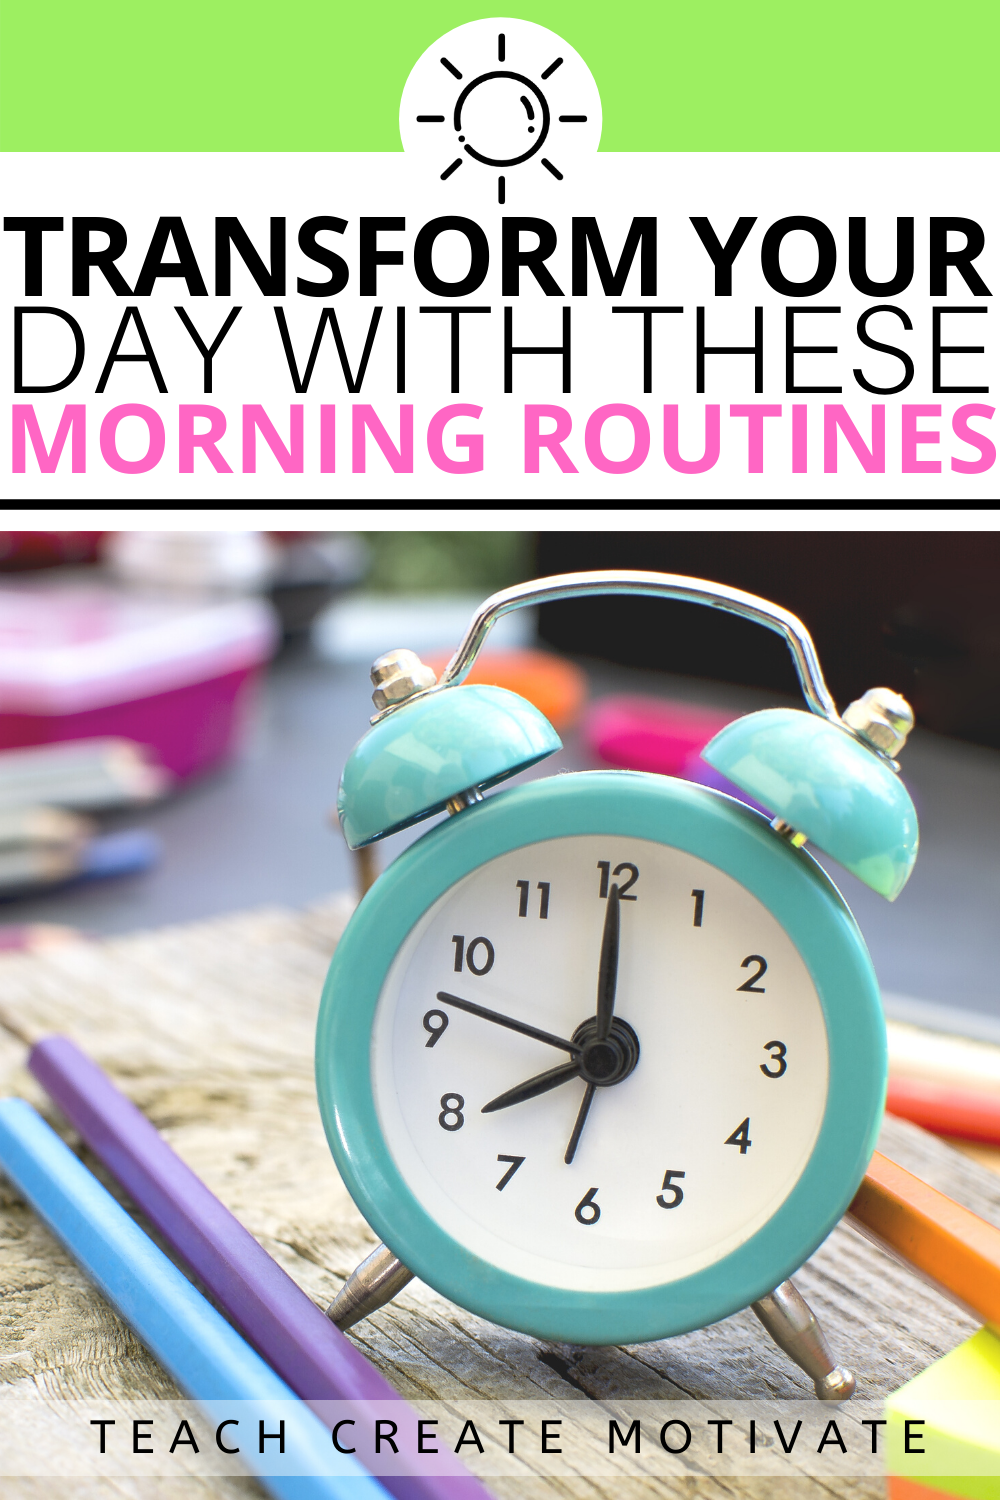 Back to school means back to busy morning routines - make sure to